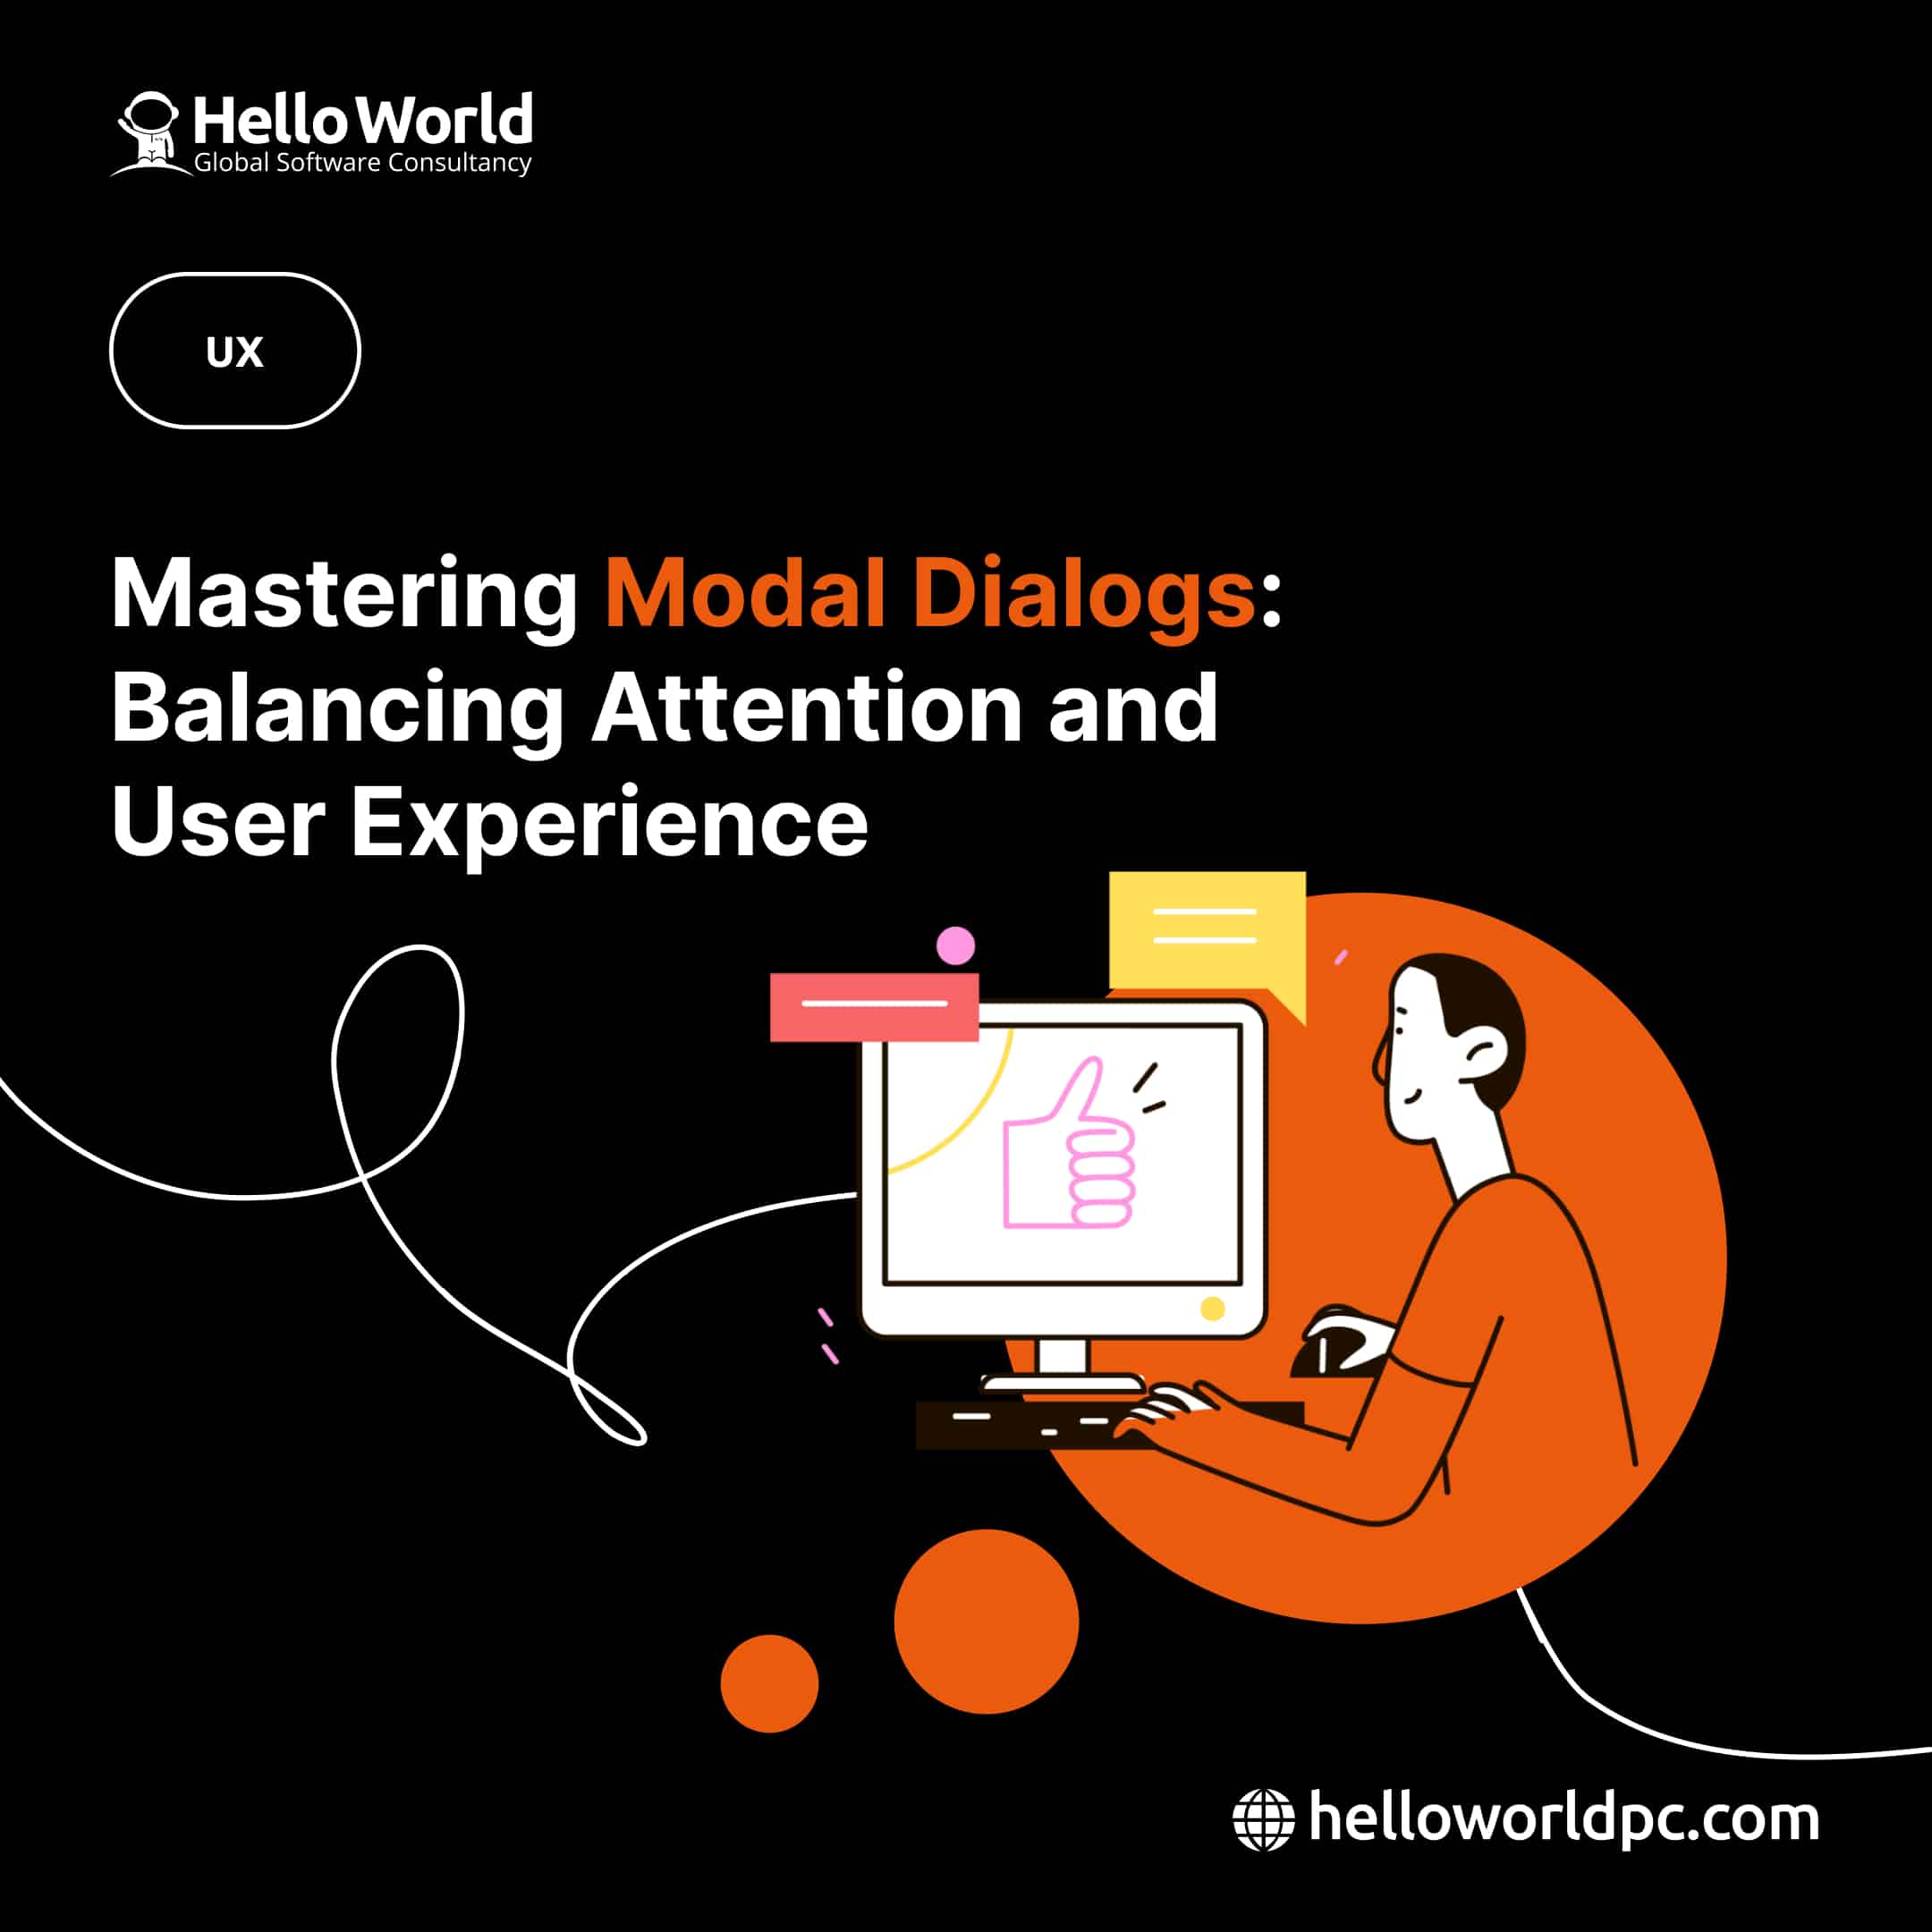 Mastering Modal Dialogs: Balancing Attention and User Experience